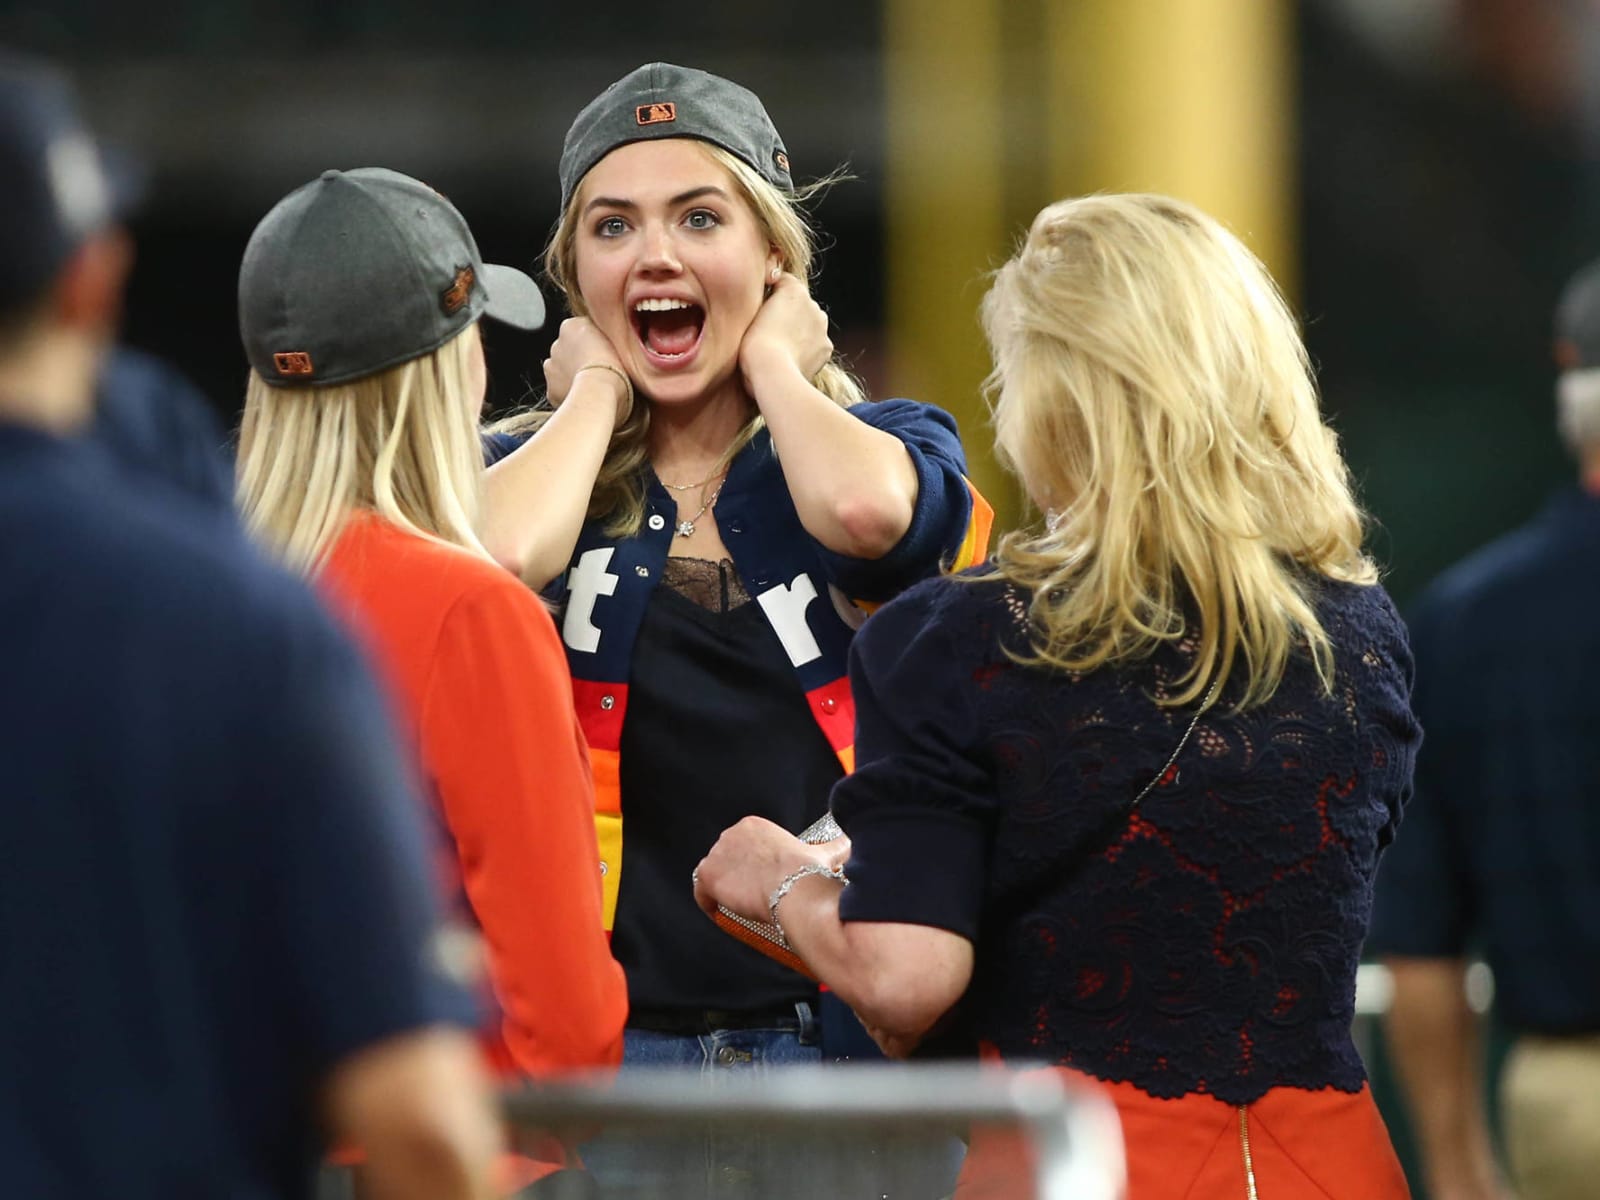 Kate Upton was so fired up after the Astros' big defensive play